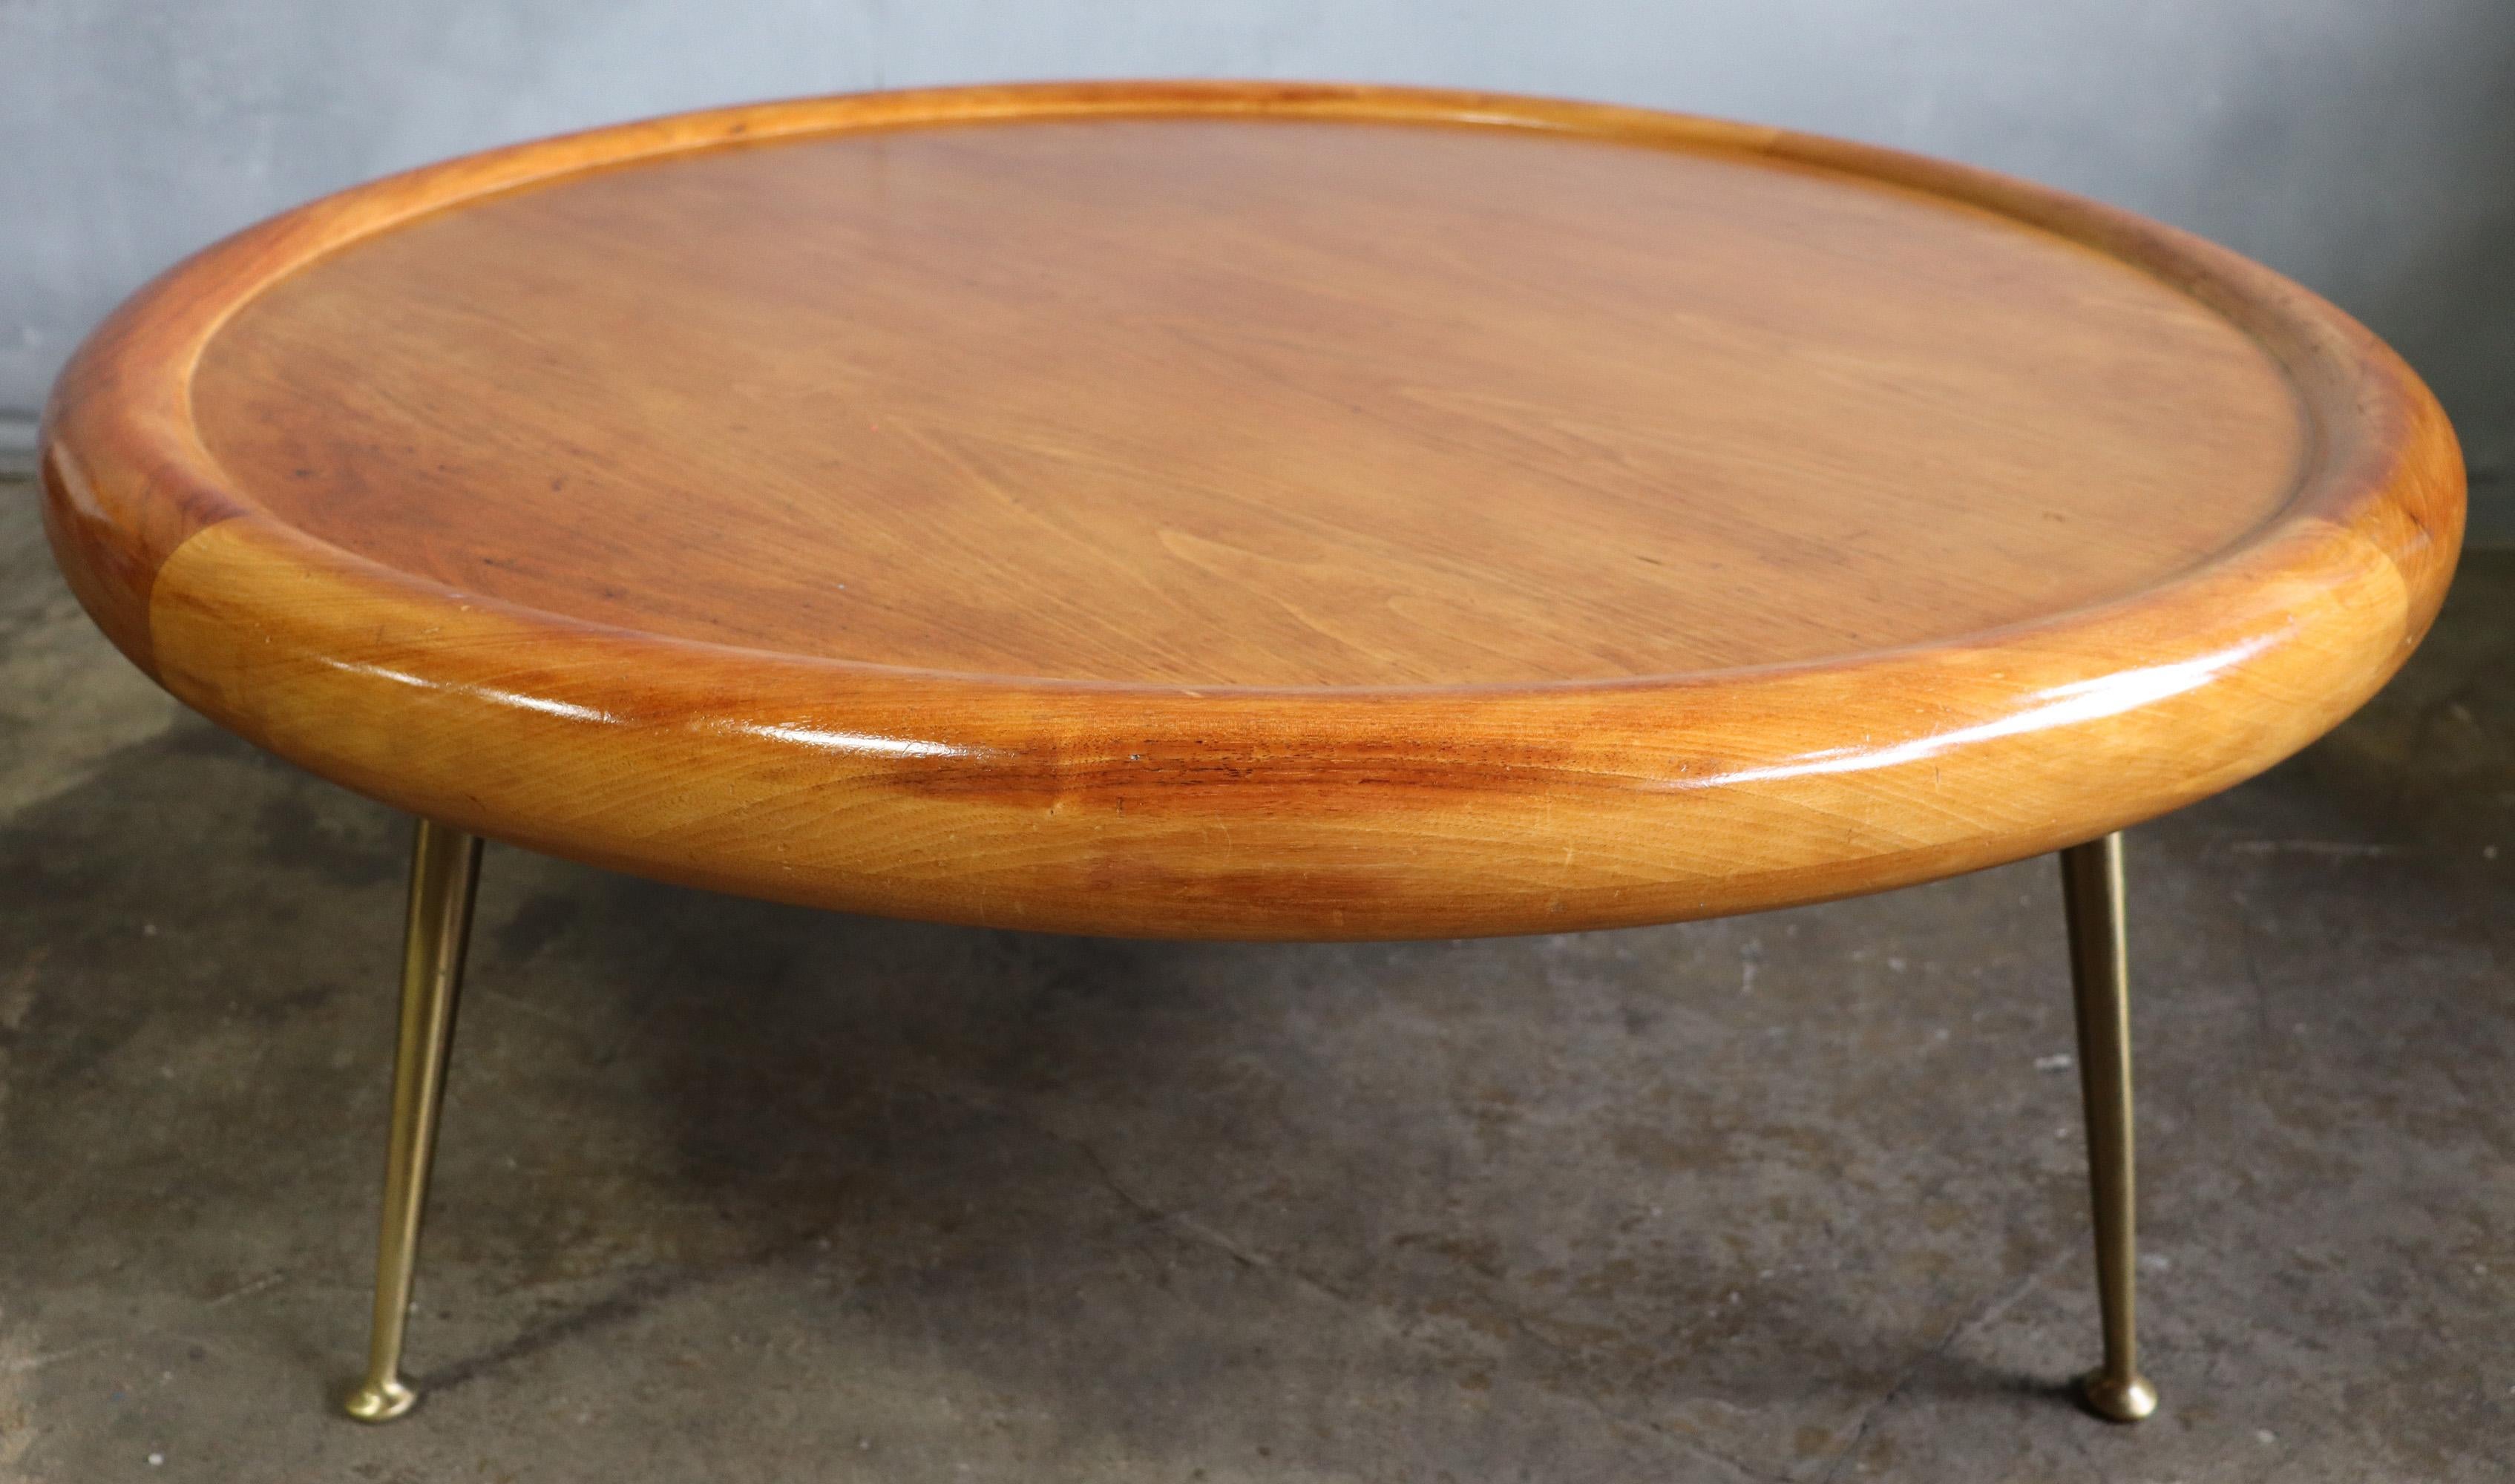 Midcentury Coffeel Table by T.H. Robsjohn-Gibbings for Widdicomb In Good Condition For Sale In BROOKLYN, NY